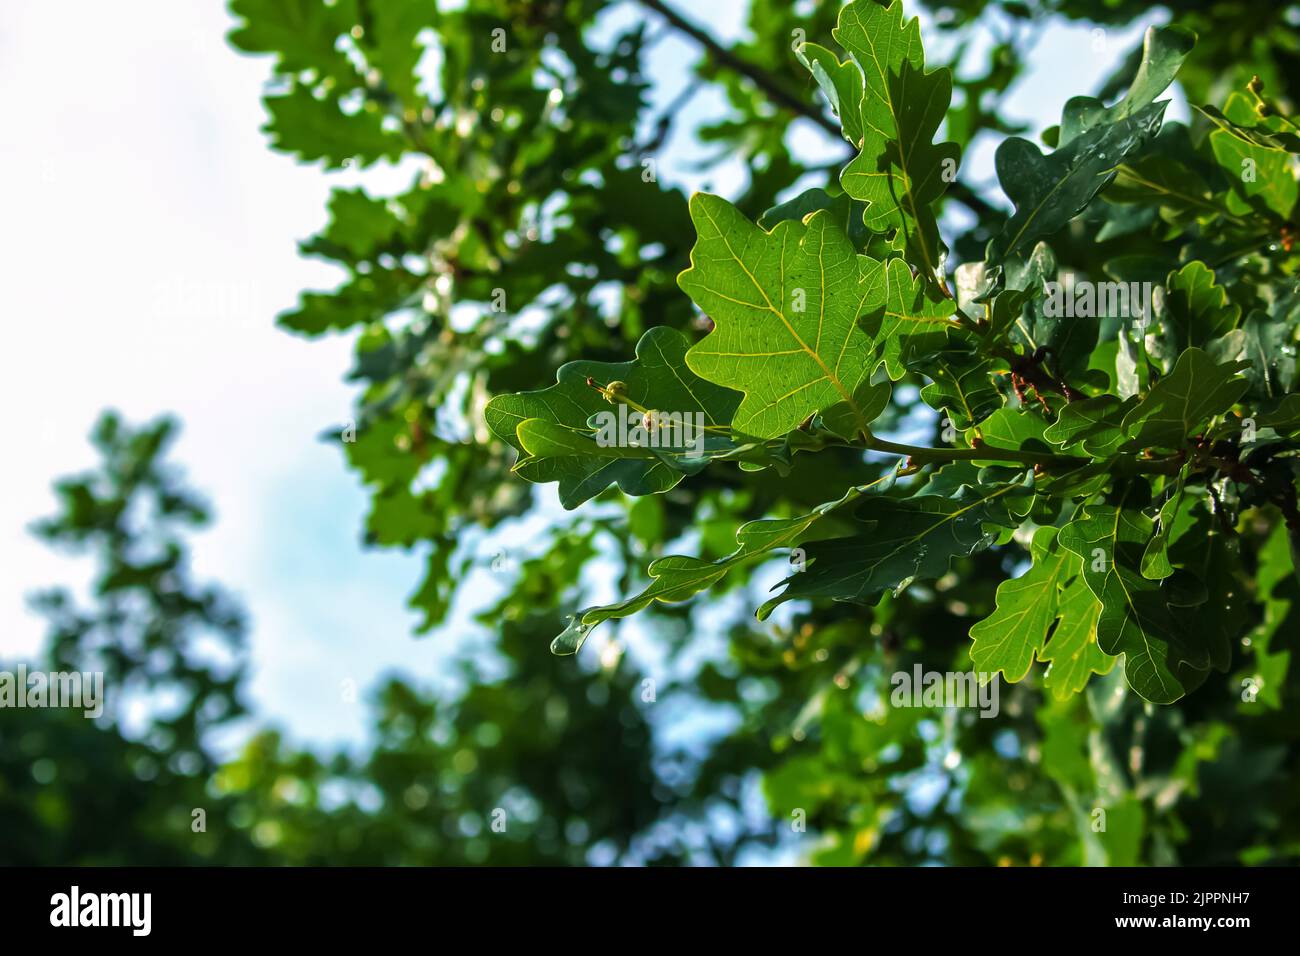 Branch of PEDUNCULATE OAK with acorns in summer. The Latin name for this tree is QUERCUS ROBUR L. Stock Photo